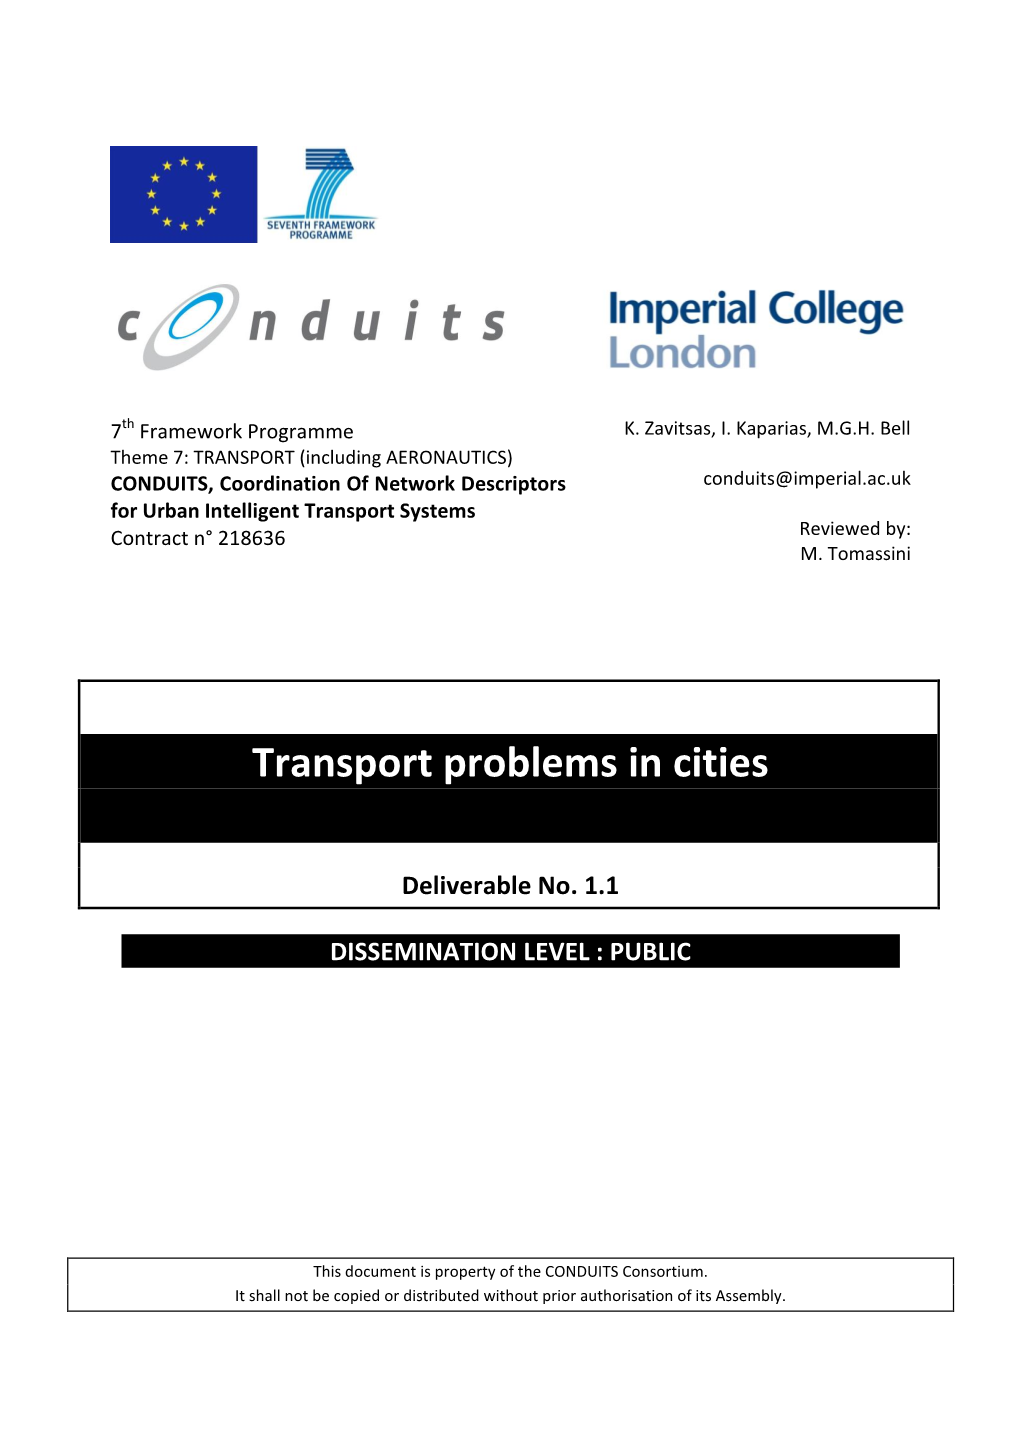 Transport Problems in Cities